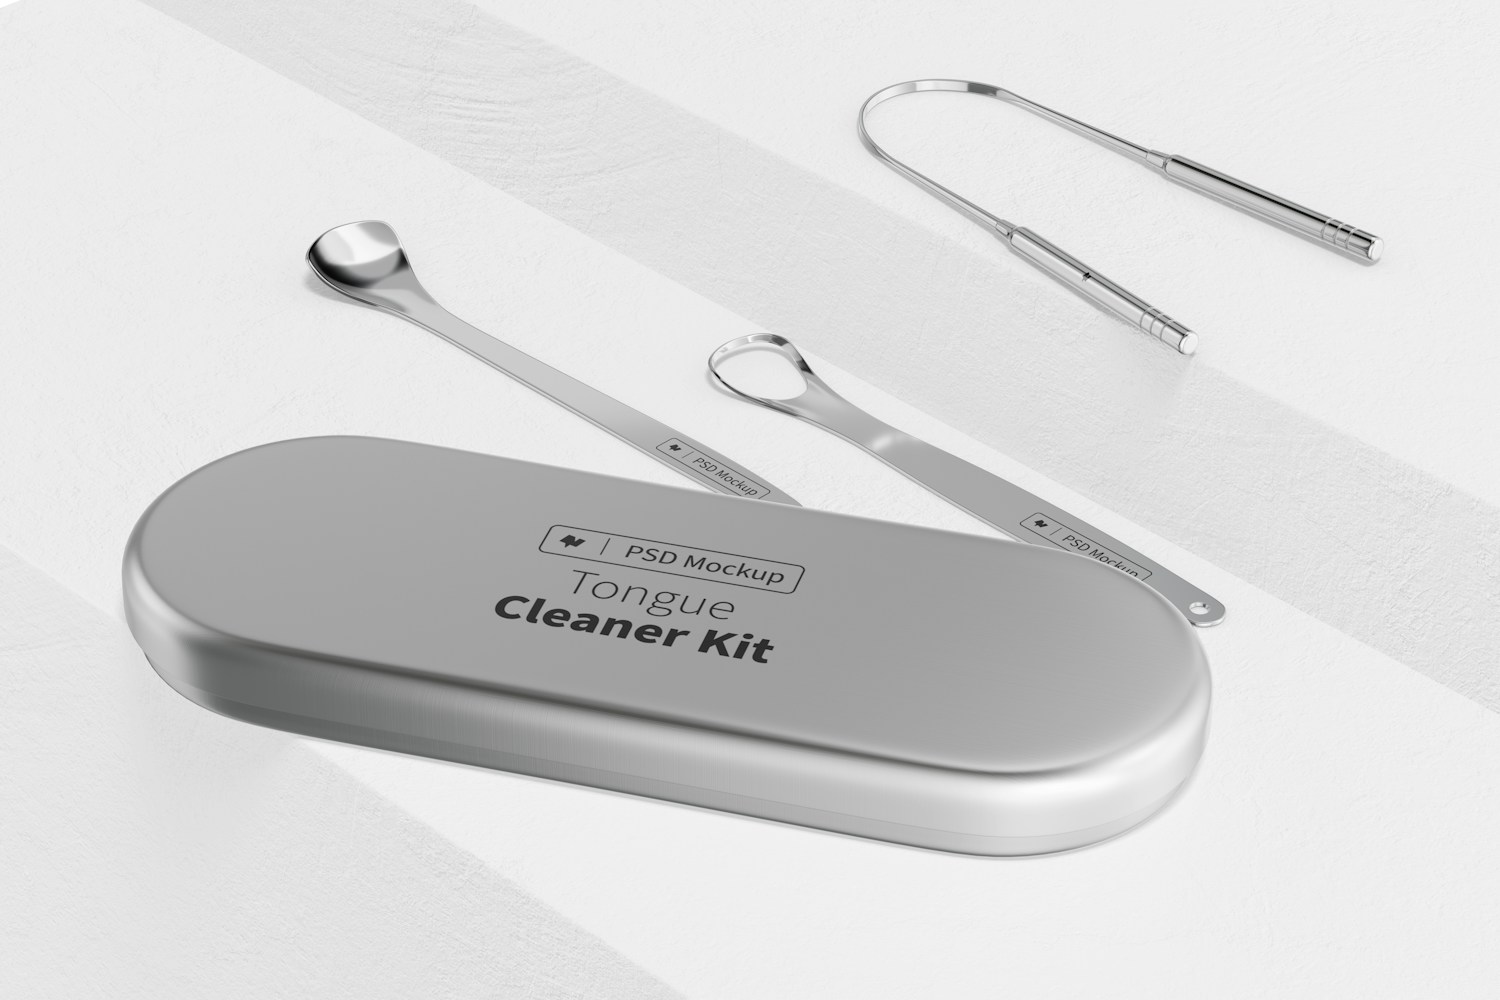 Tongue Cleaner Kit Mockup, Perspective